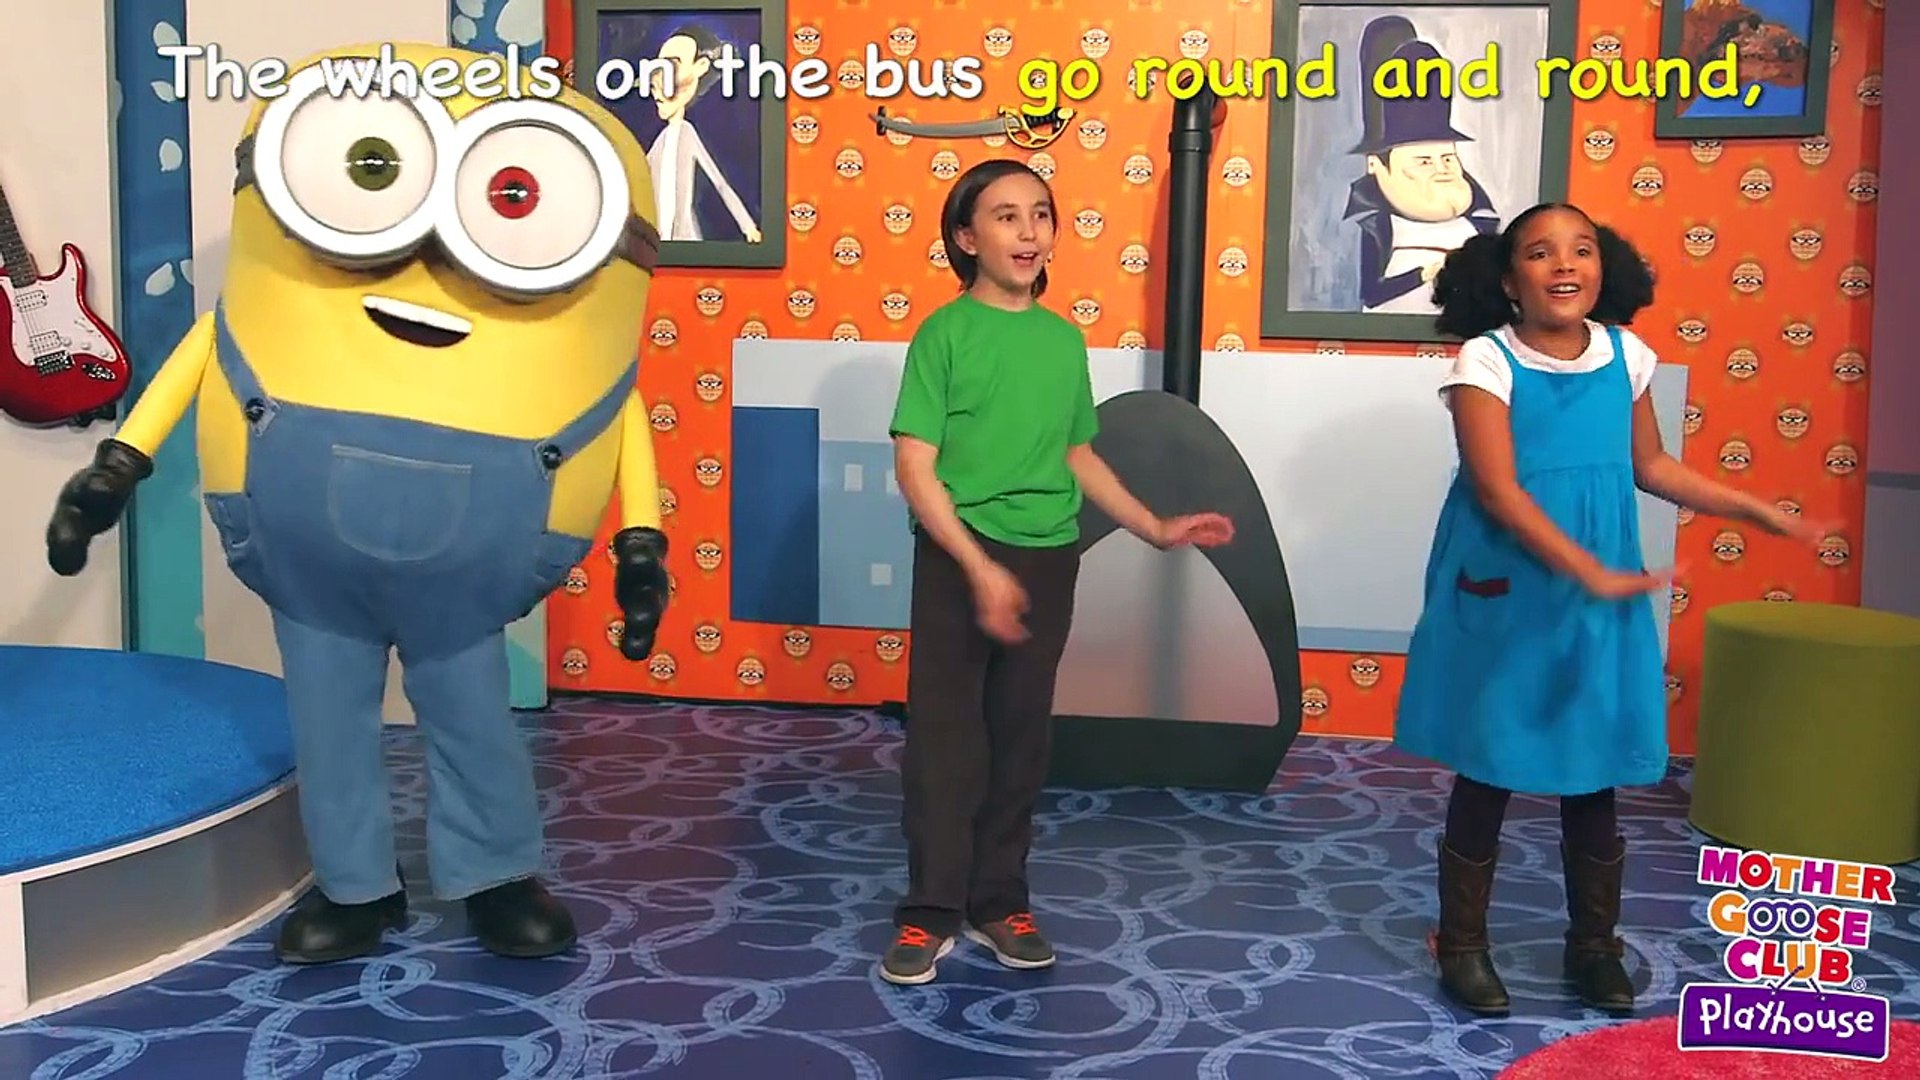 The Wheels on the Bus Featuring Minions! | Mother Goose Club Playhouse Kids  Video - Dailymotion Video